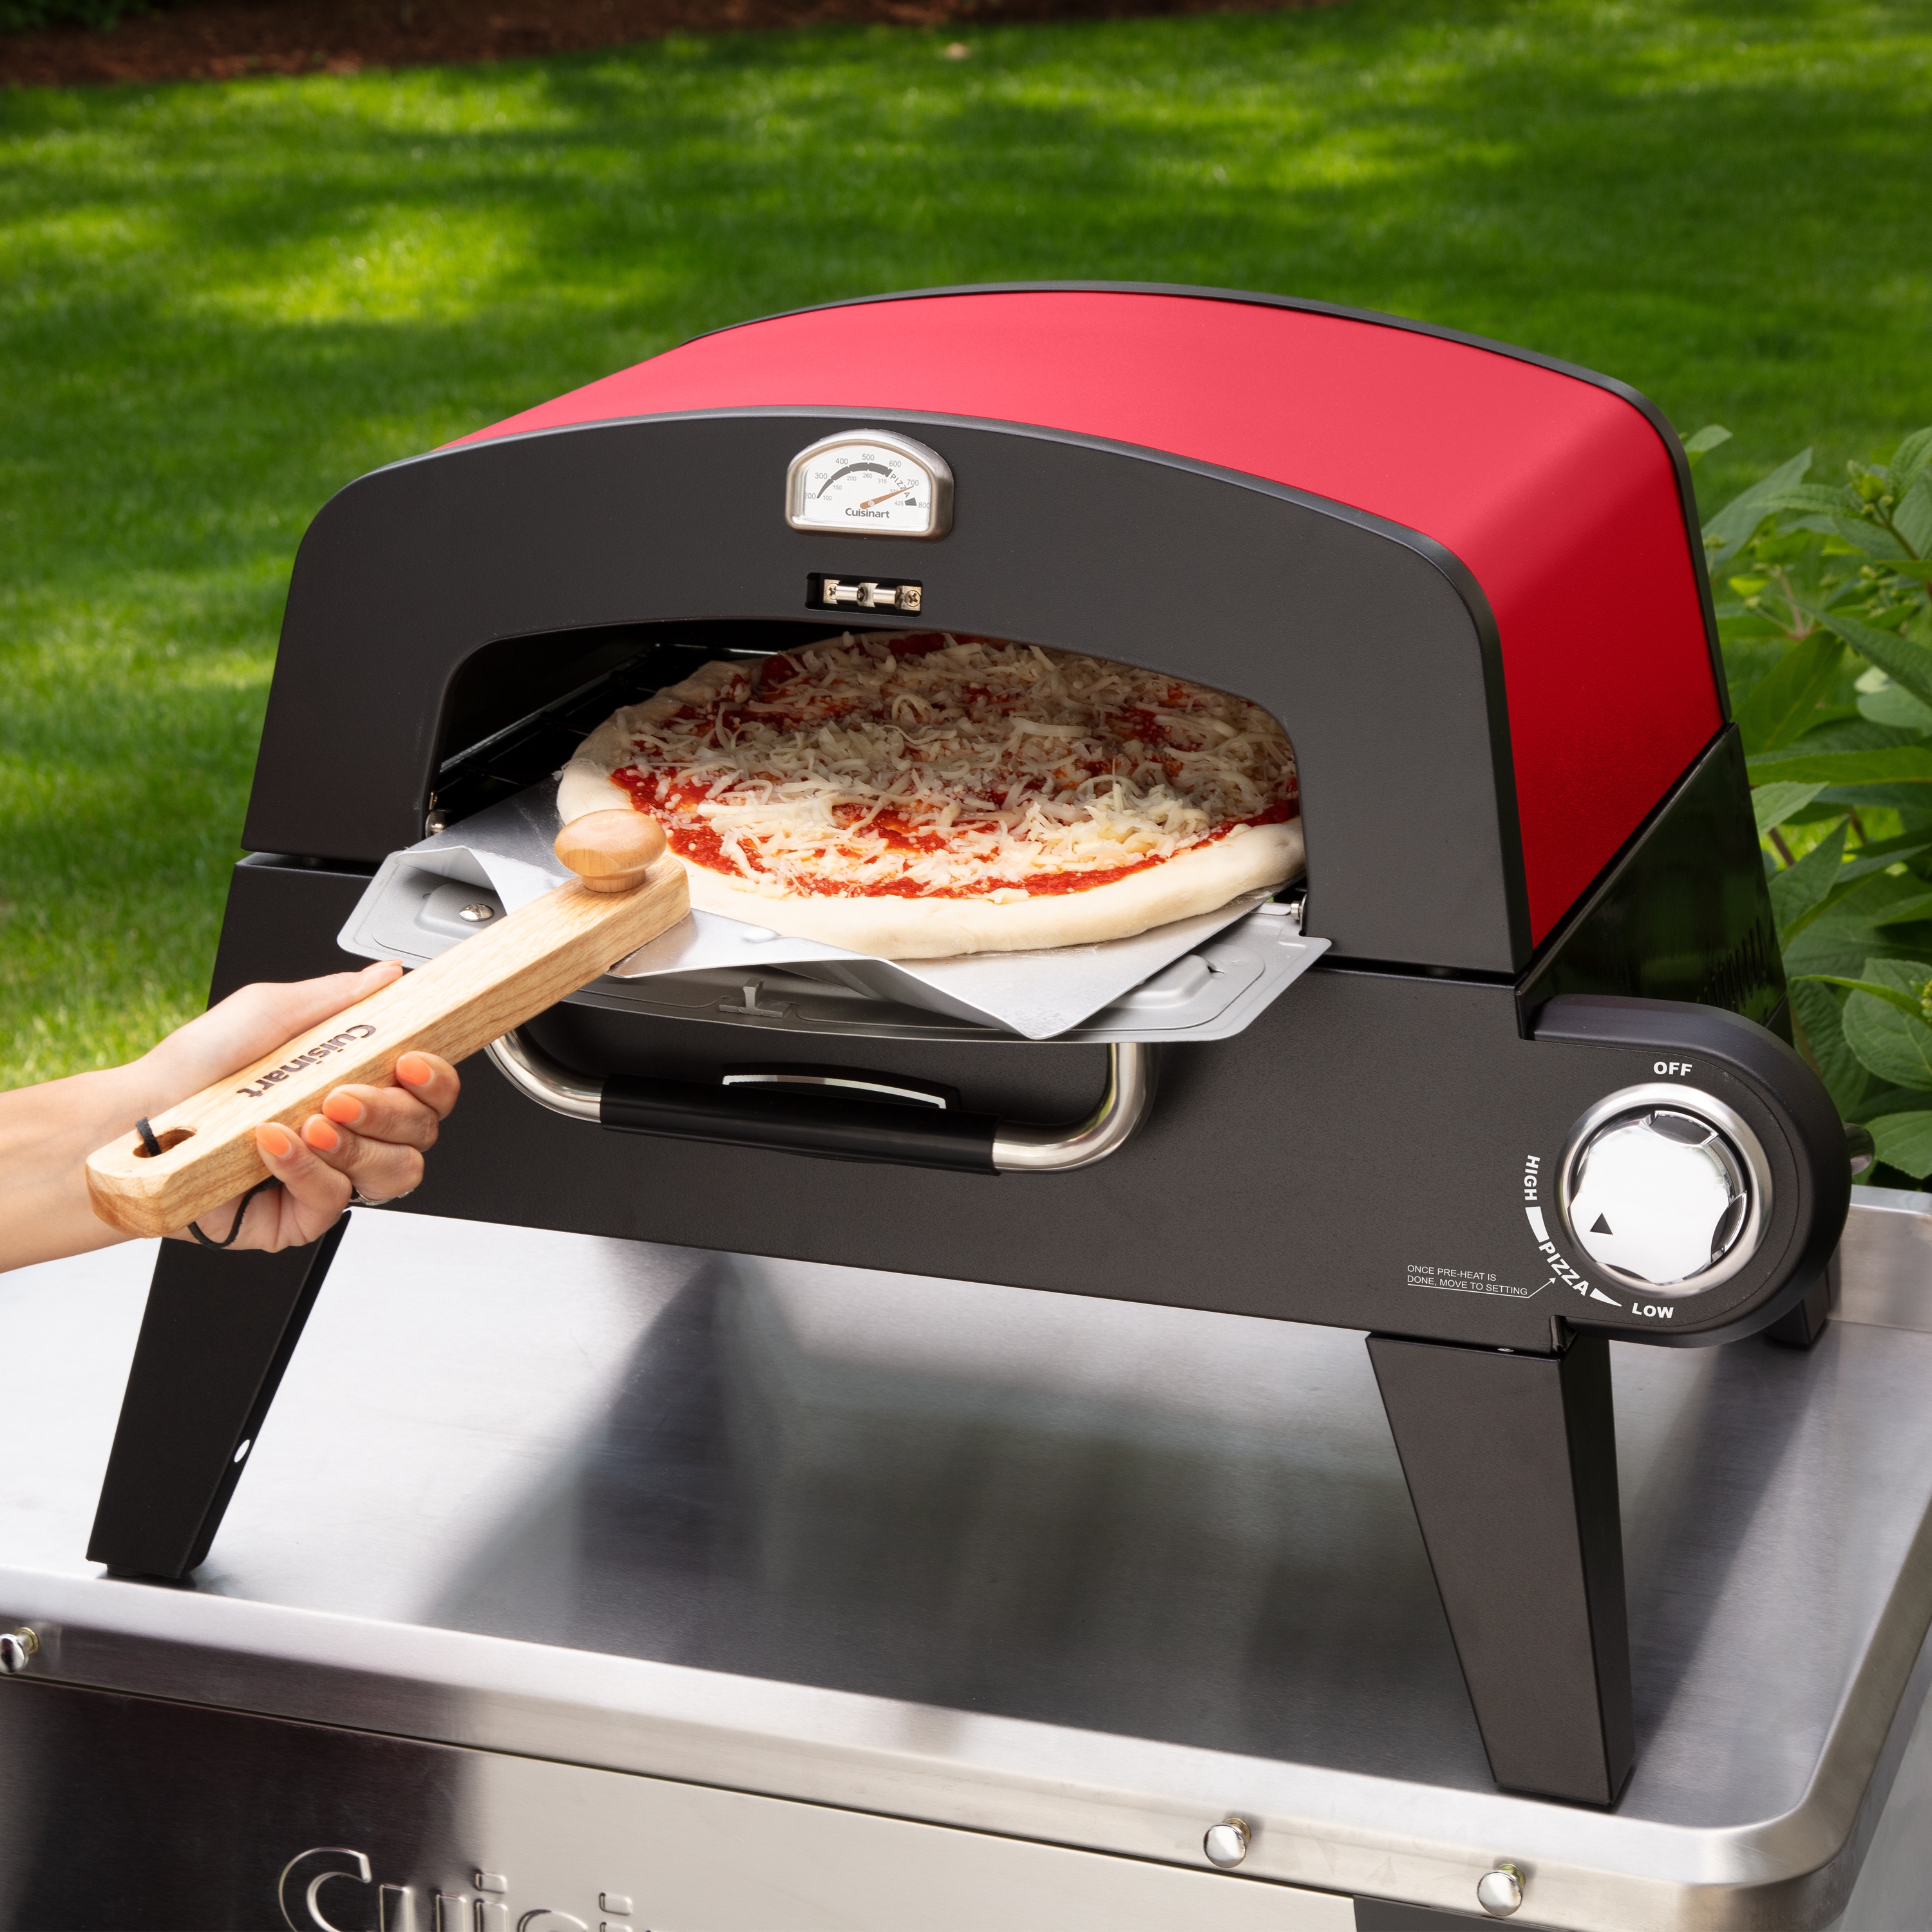 Cuisinart - Portable Propane Outdoor Pizza Oven - Red